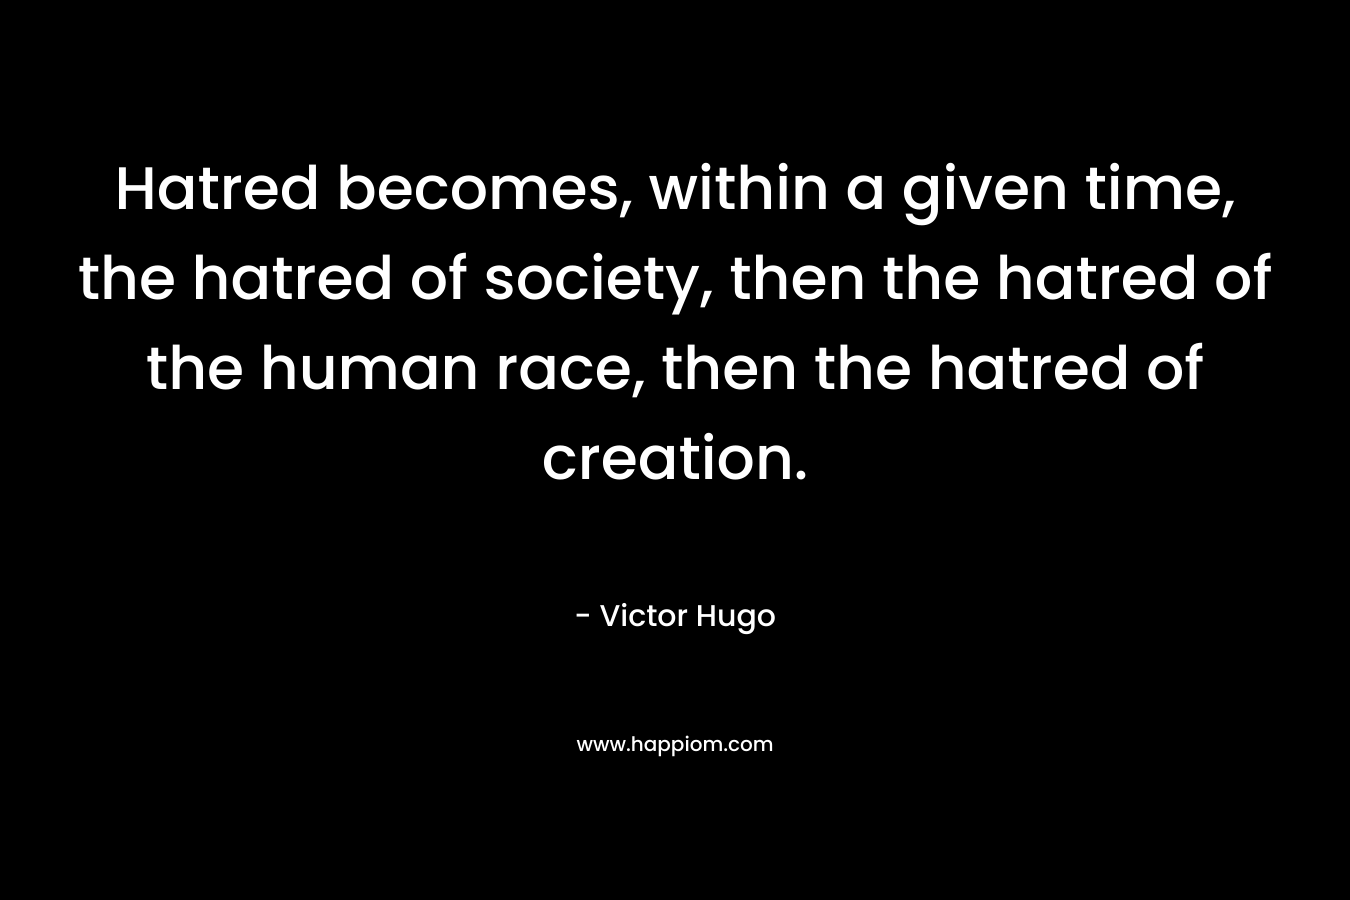 Hatred becomes, within a given time, the hatred of society, then the hatred of the human race, then the hatred of creation. – Victor Hugo